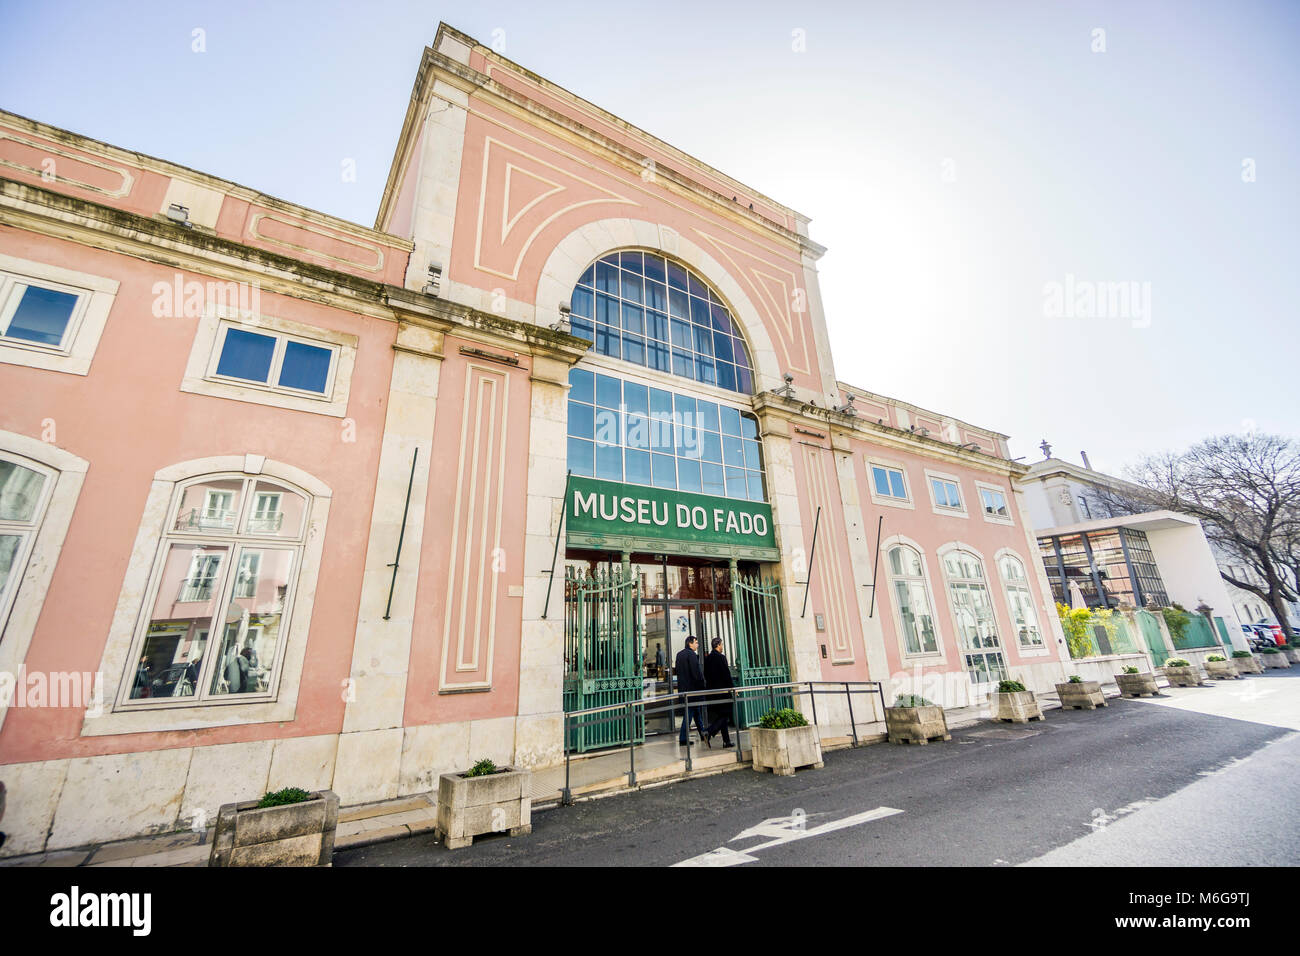 Lisbon, Portugal - January 30, 2018: Facade of Fado museum building during sunny day. Stock Photo